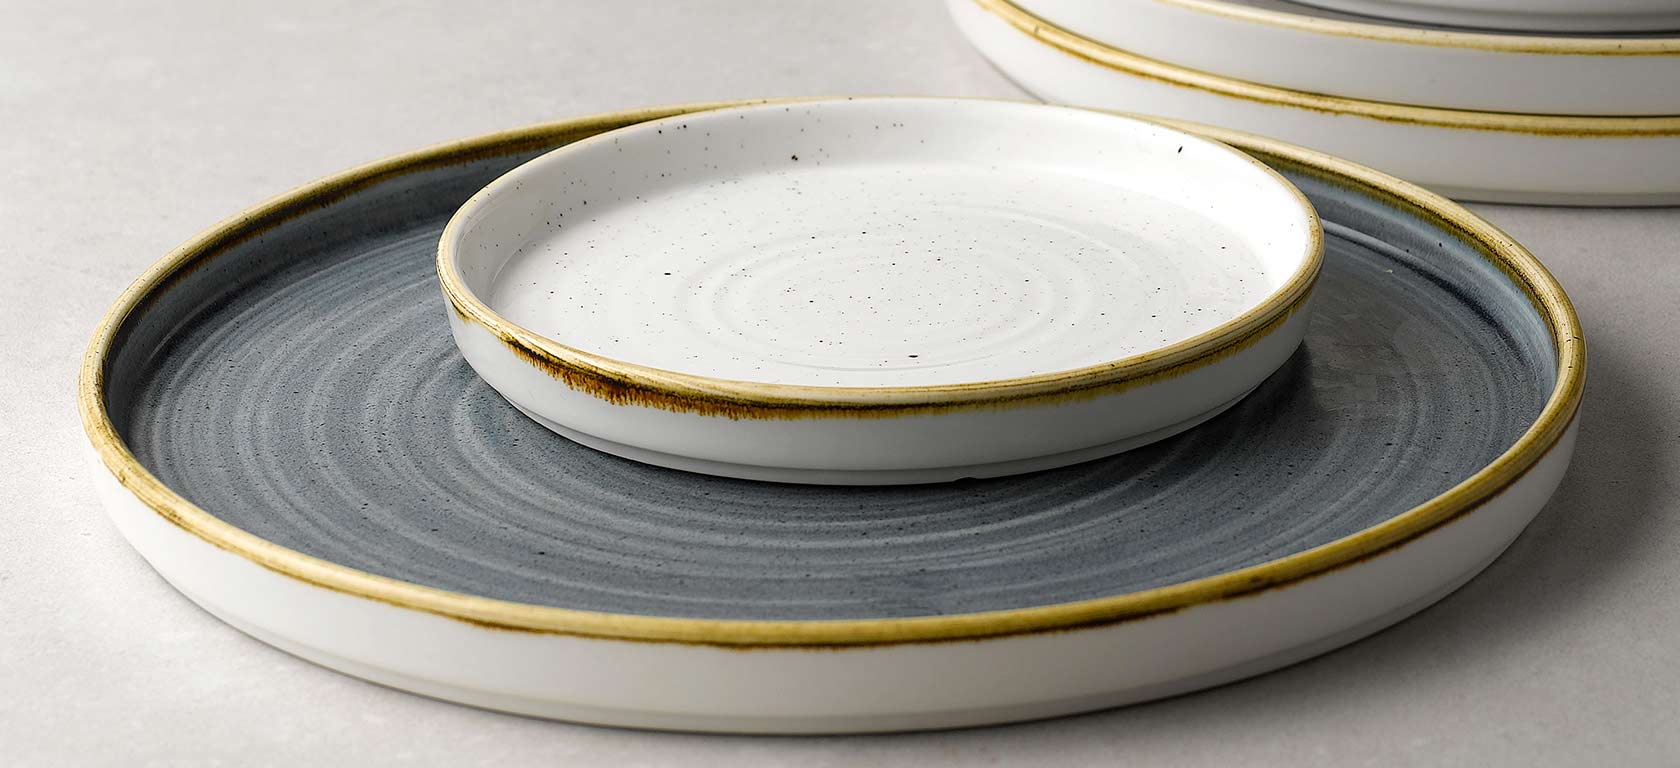 Gold trimmed ceramic plates with circular indents.